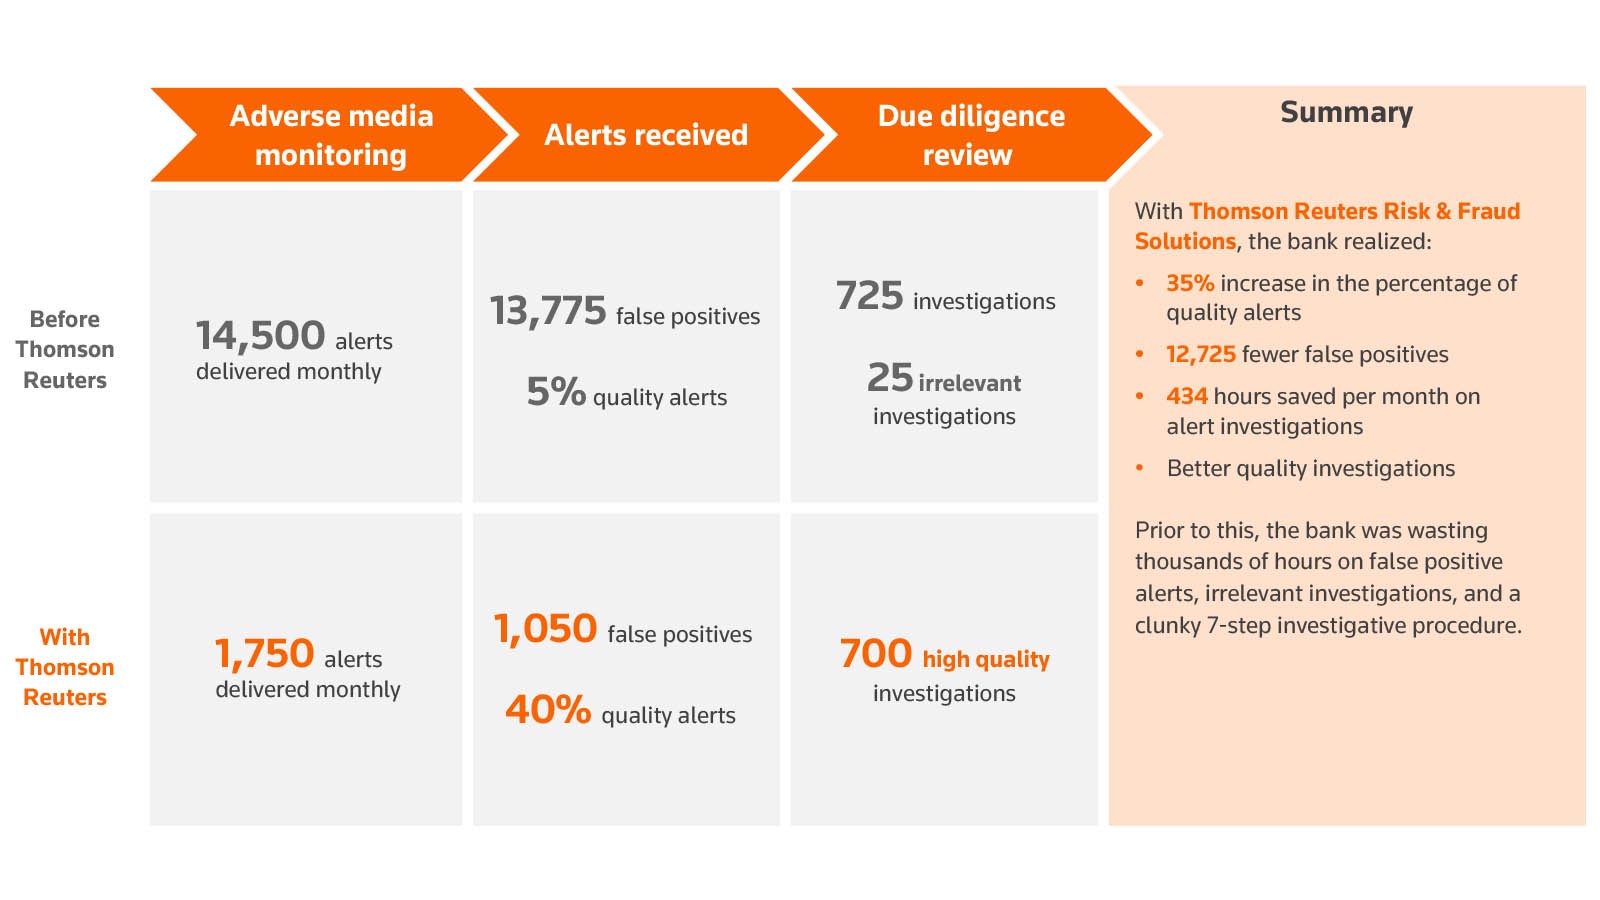 ROI of thomson reuters adverse media solution